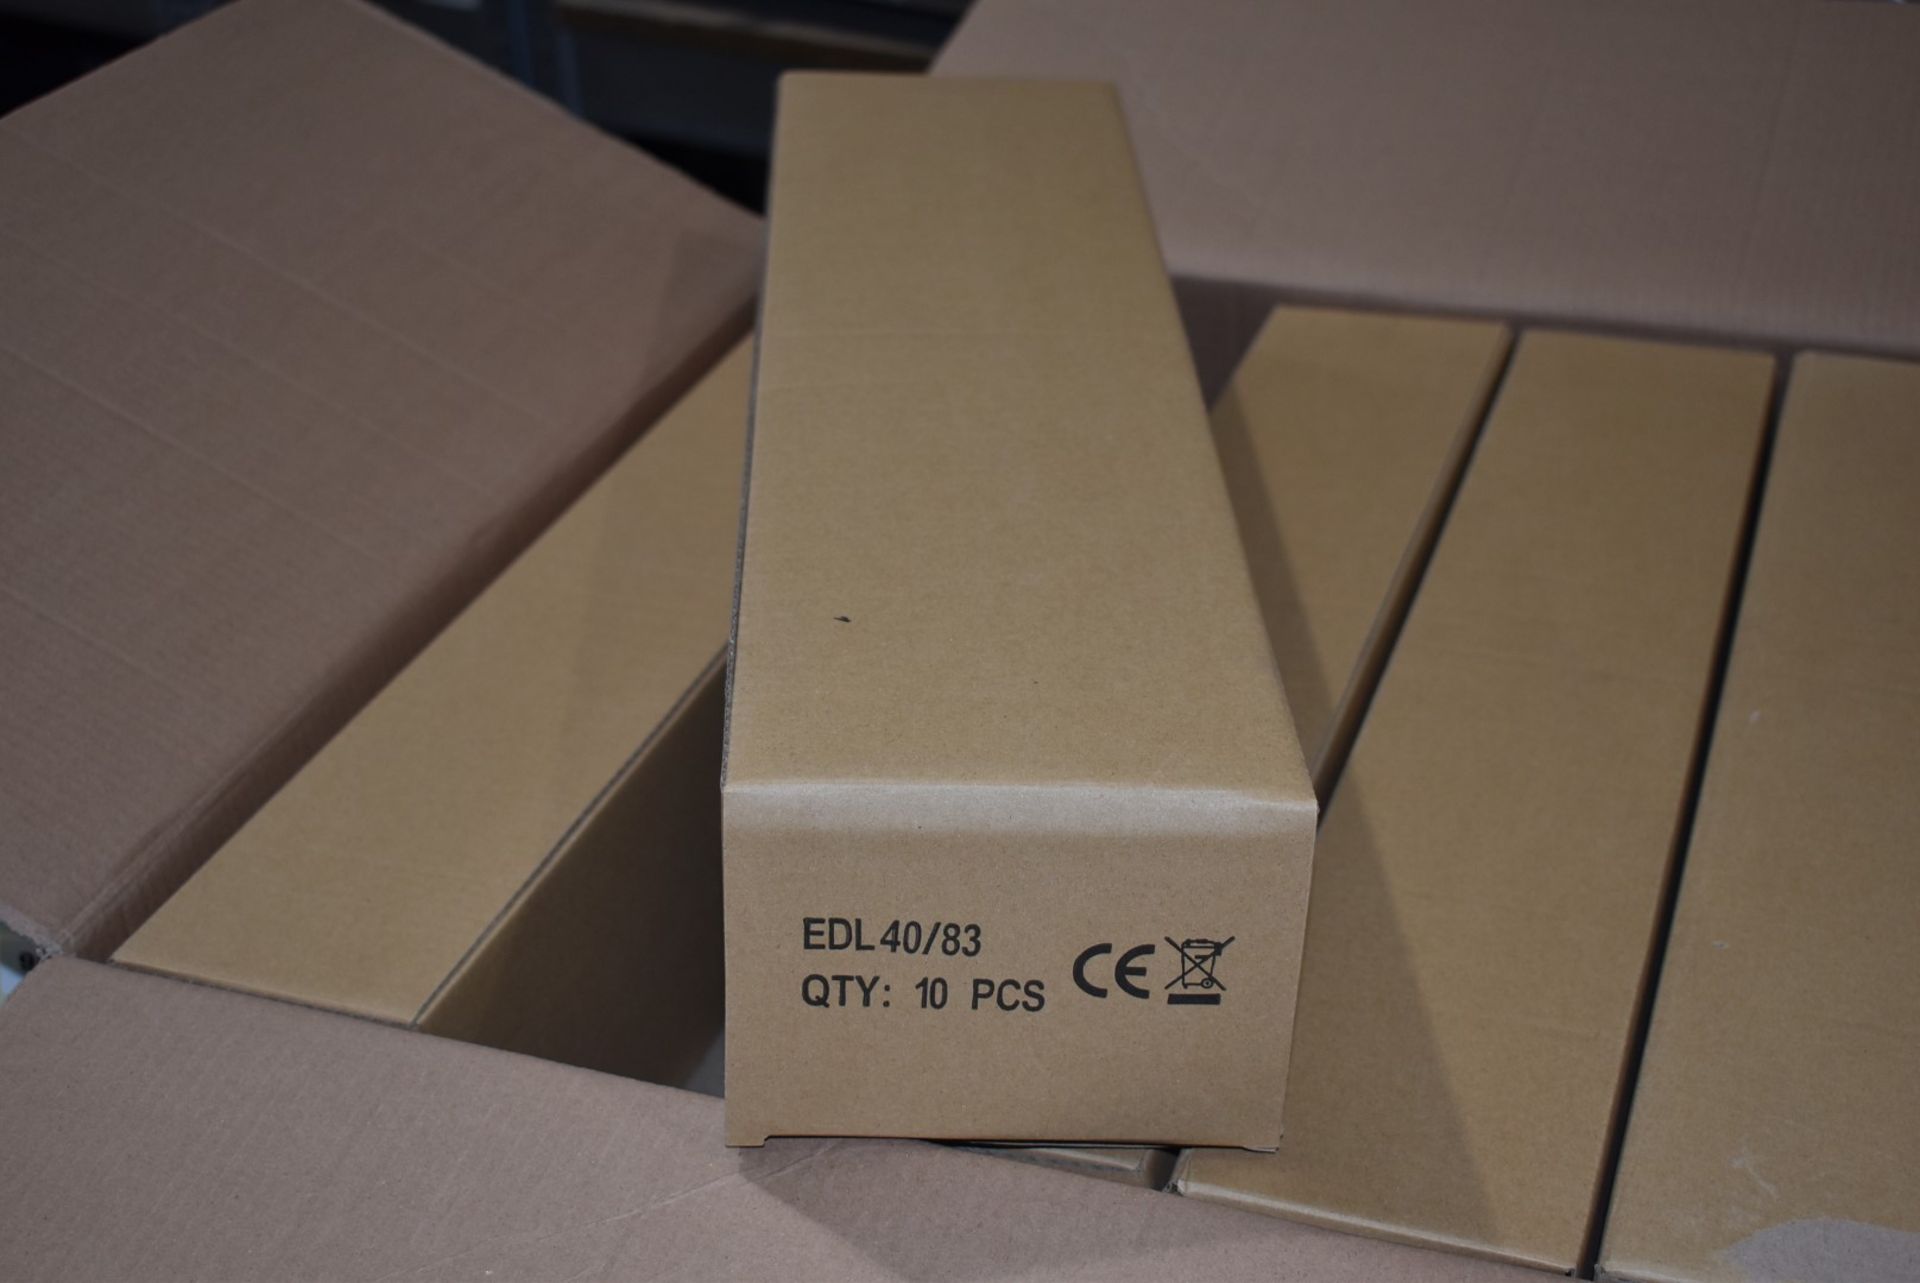 10 x Edison 40W 2G11 4 Pin Long Compact 3000K Fluorescent Lamps - New Boxed Stock - RRP £70 - Image 2 of 7